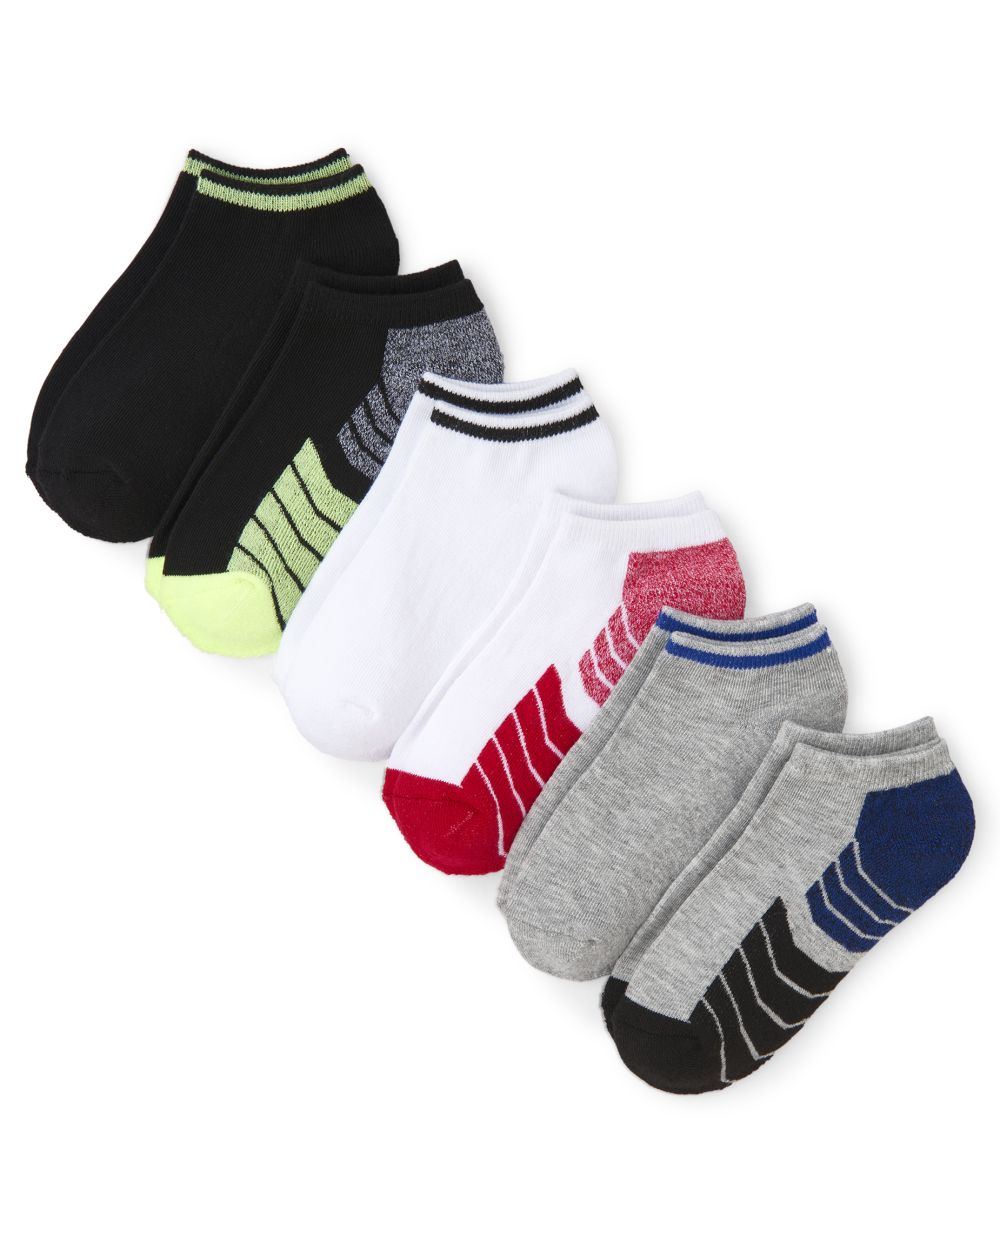 Boys Striped Cushioned Ankle Socks 6-Pack